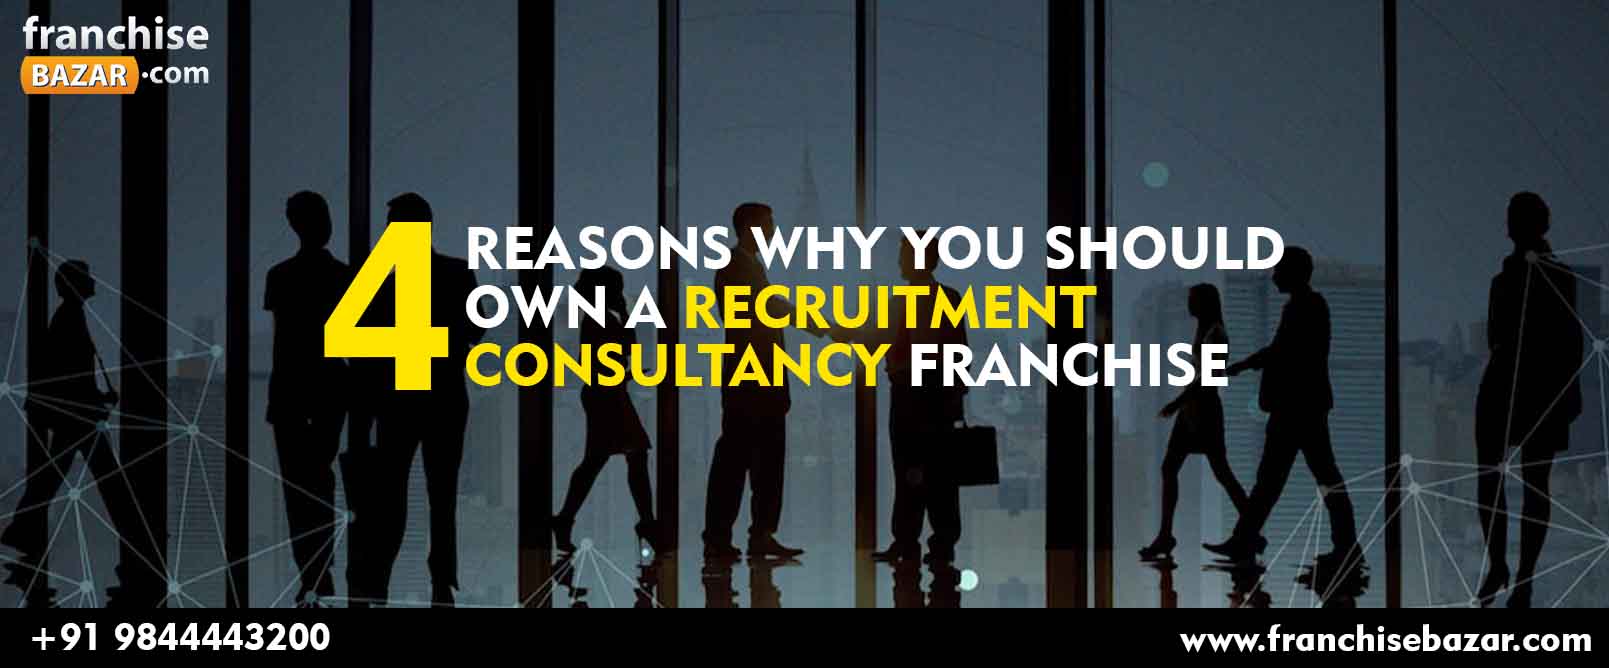 4 Reasons Why You Should Own A Recruitment Consultancy Franchise